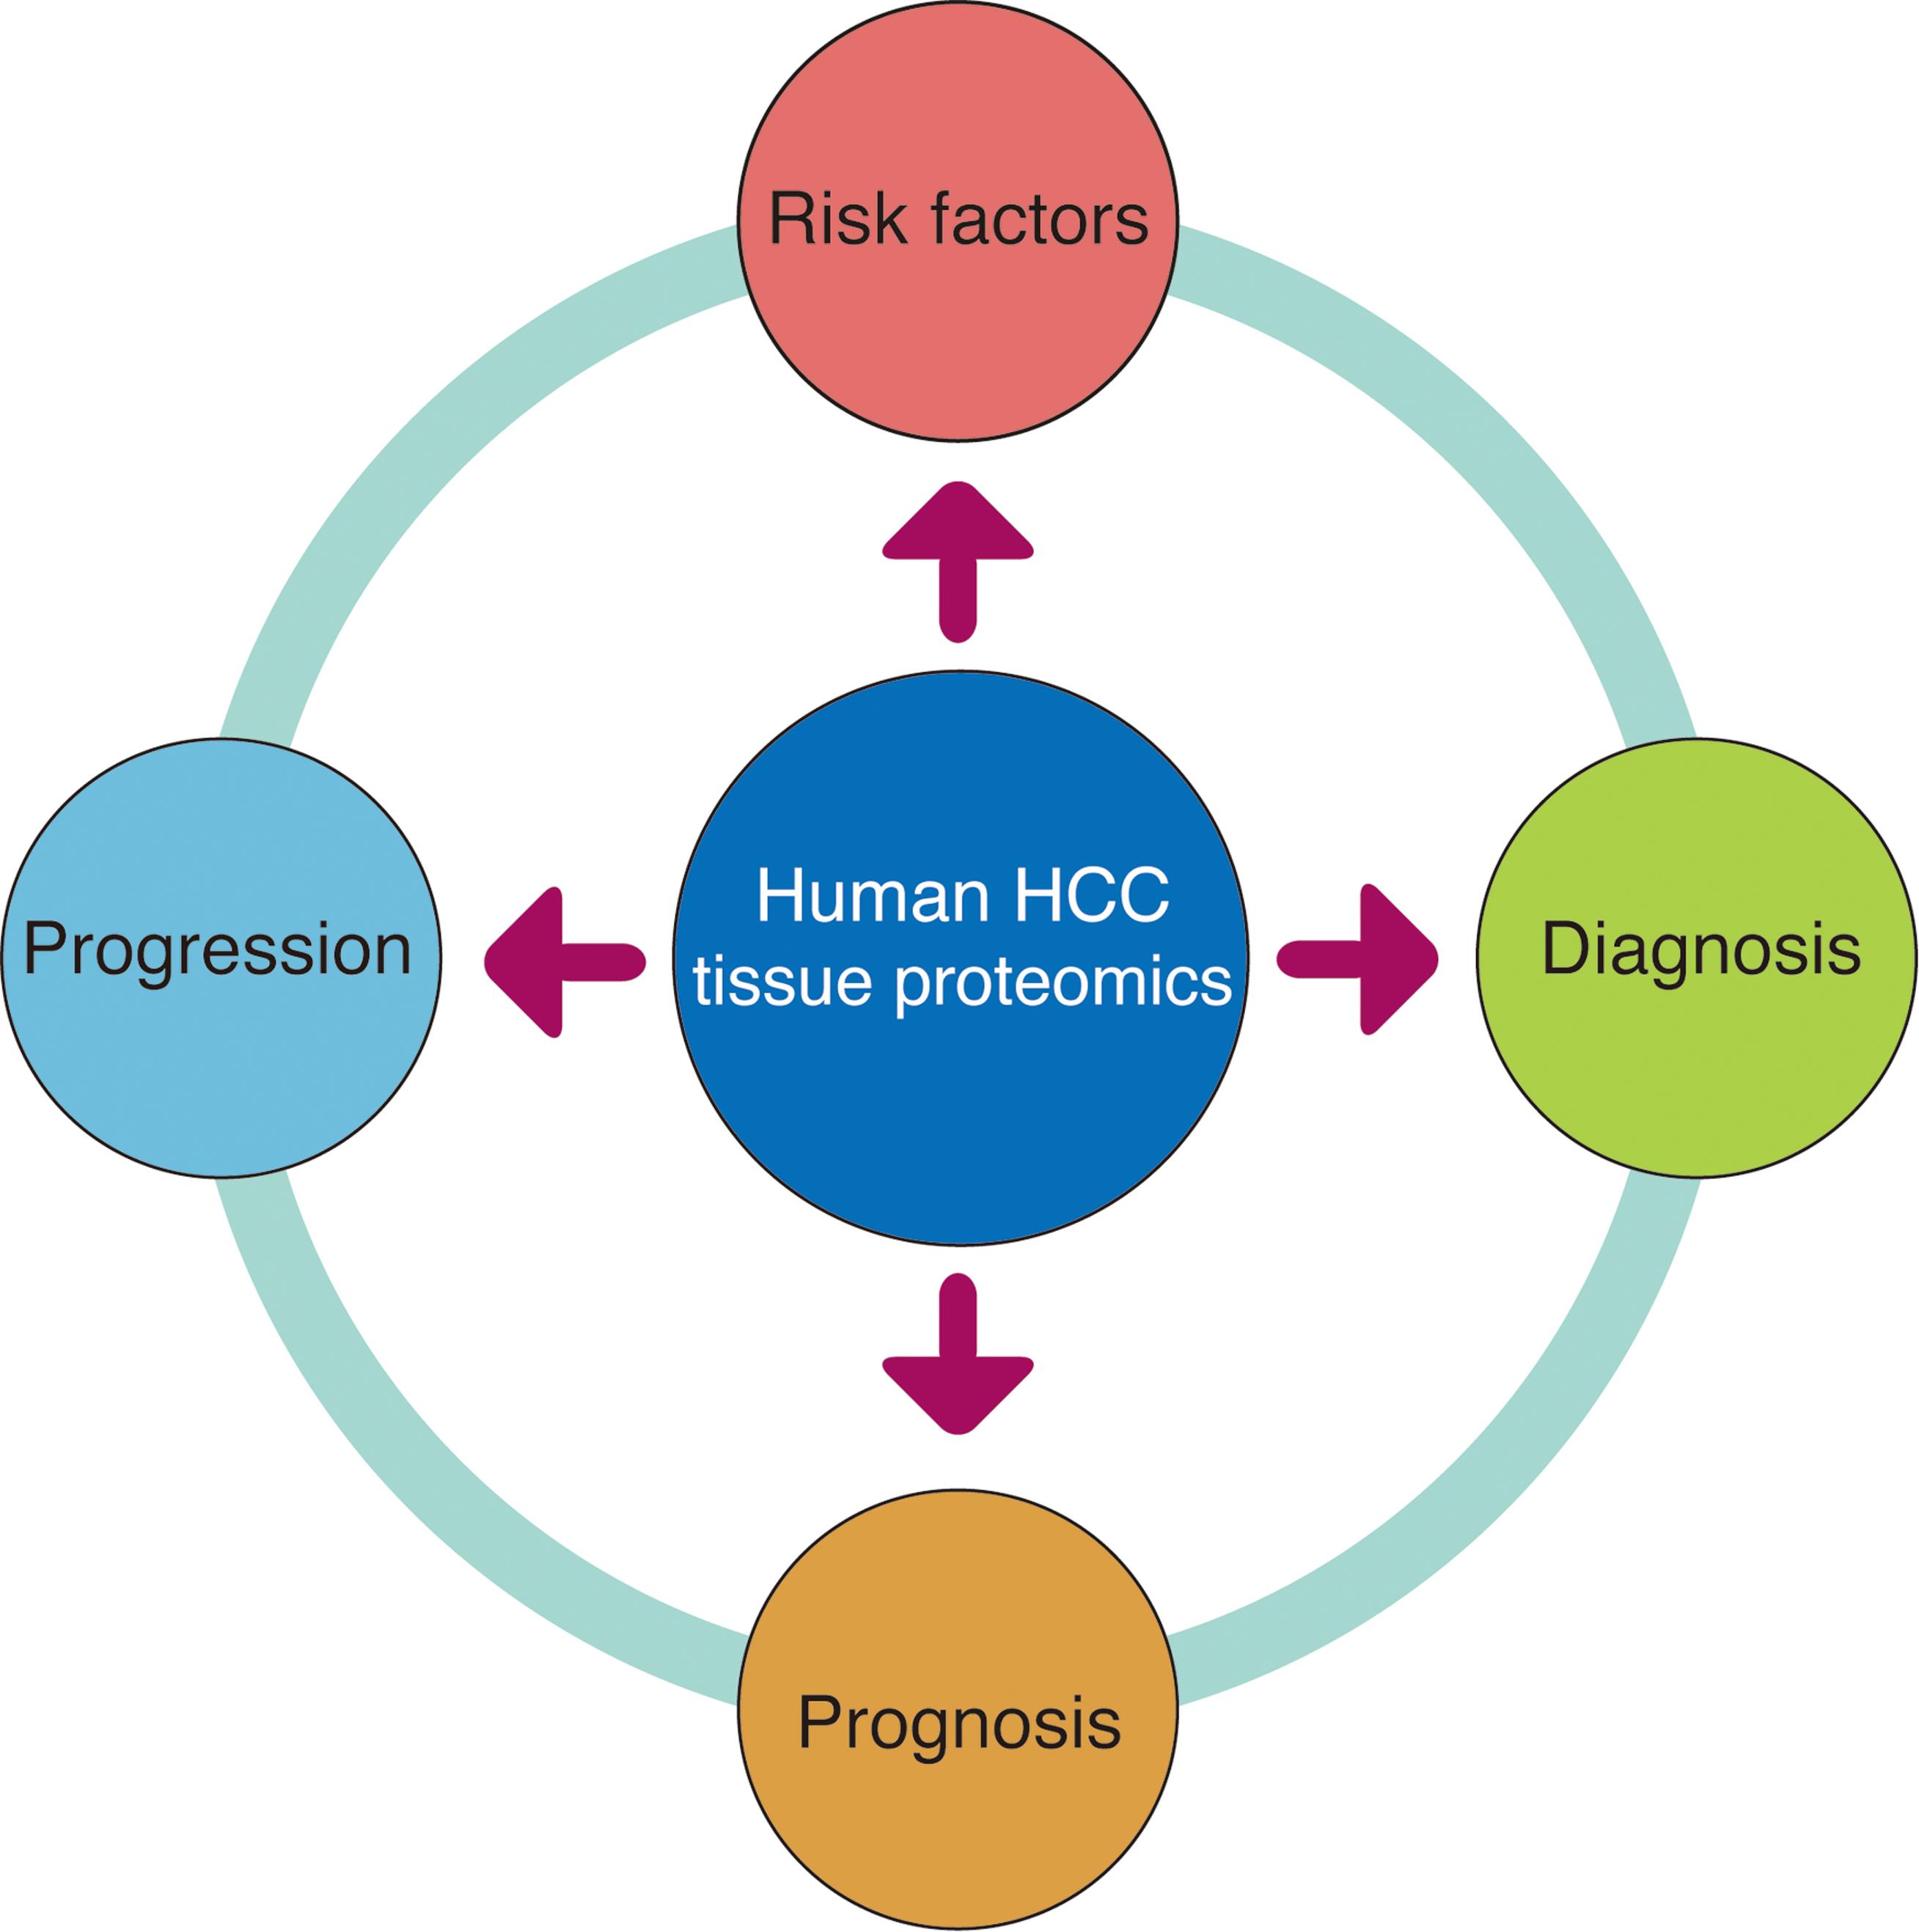 HCC-related questions mostly pursued in tissue-based proteomic studies using human HCC samples.